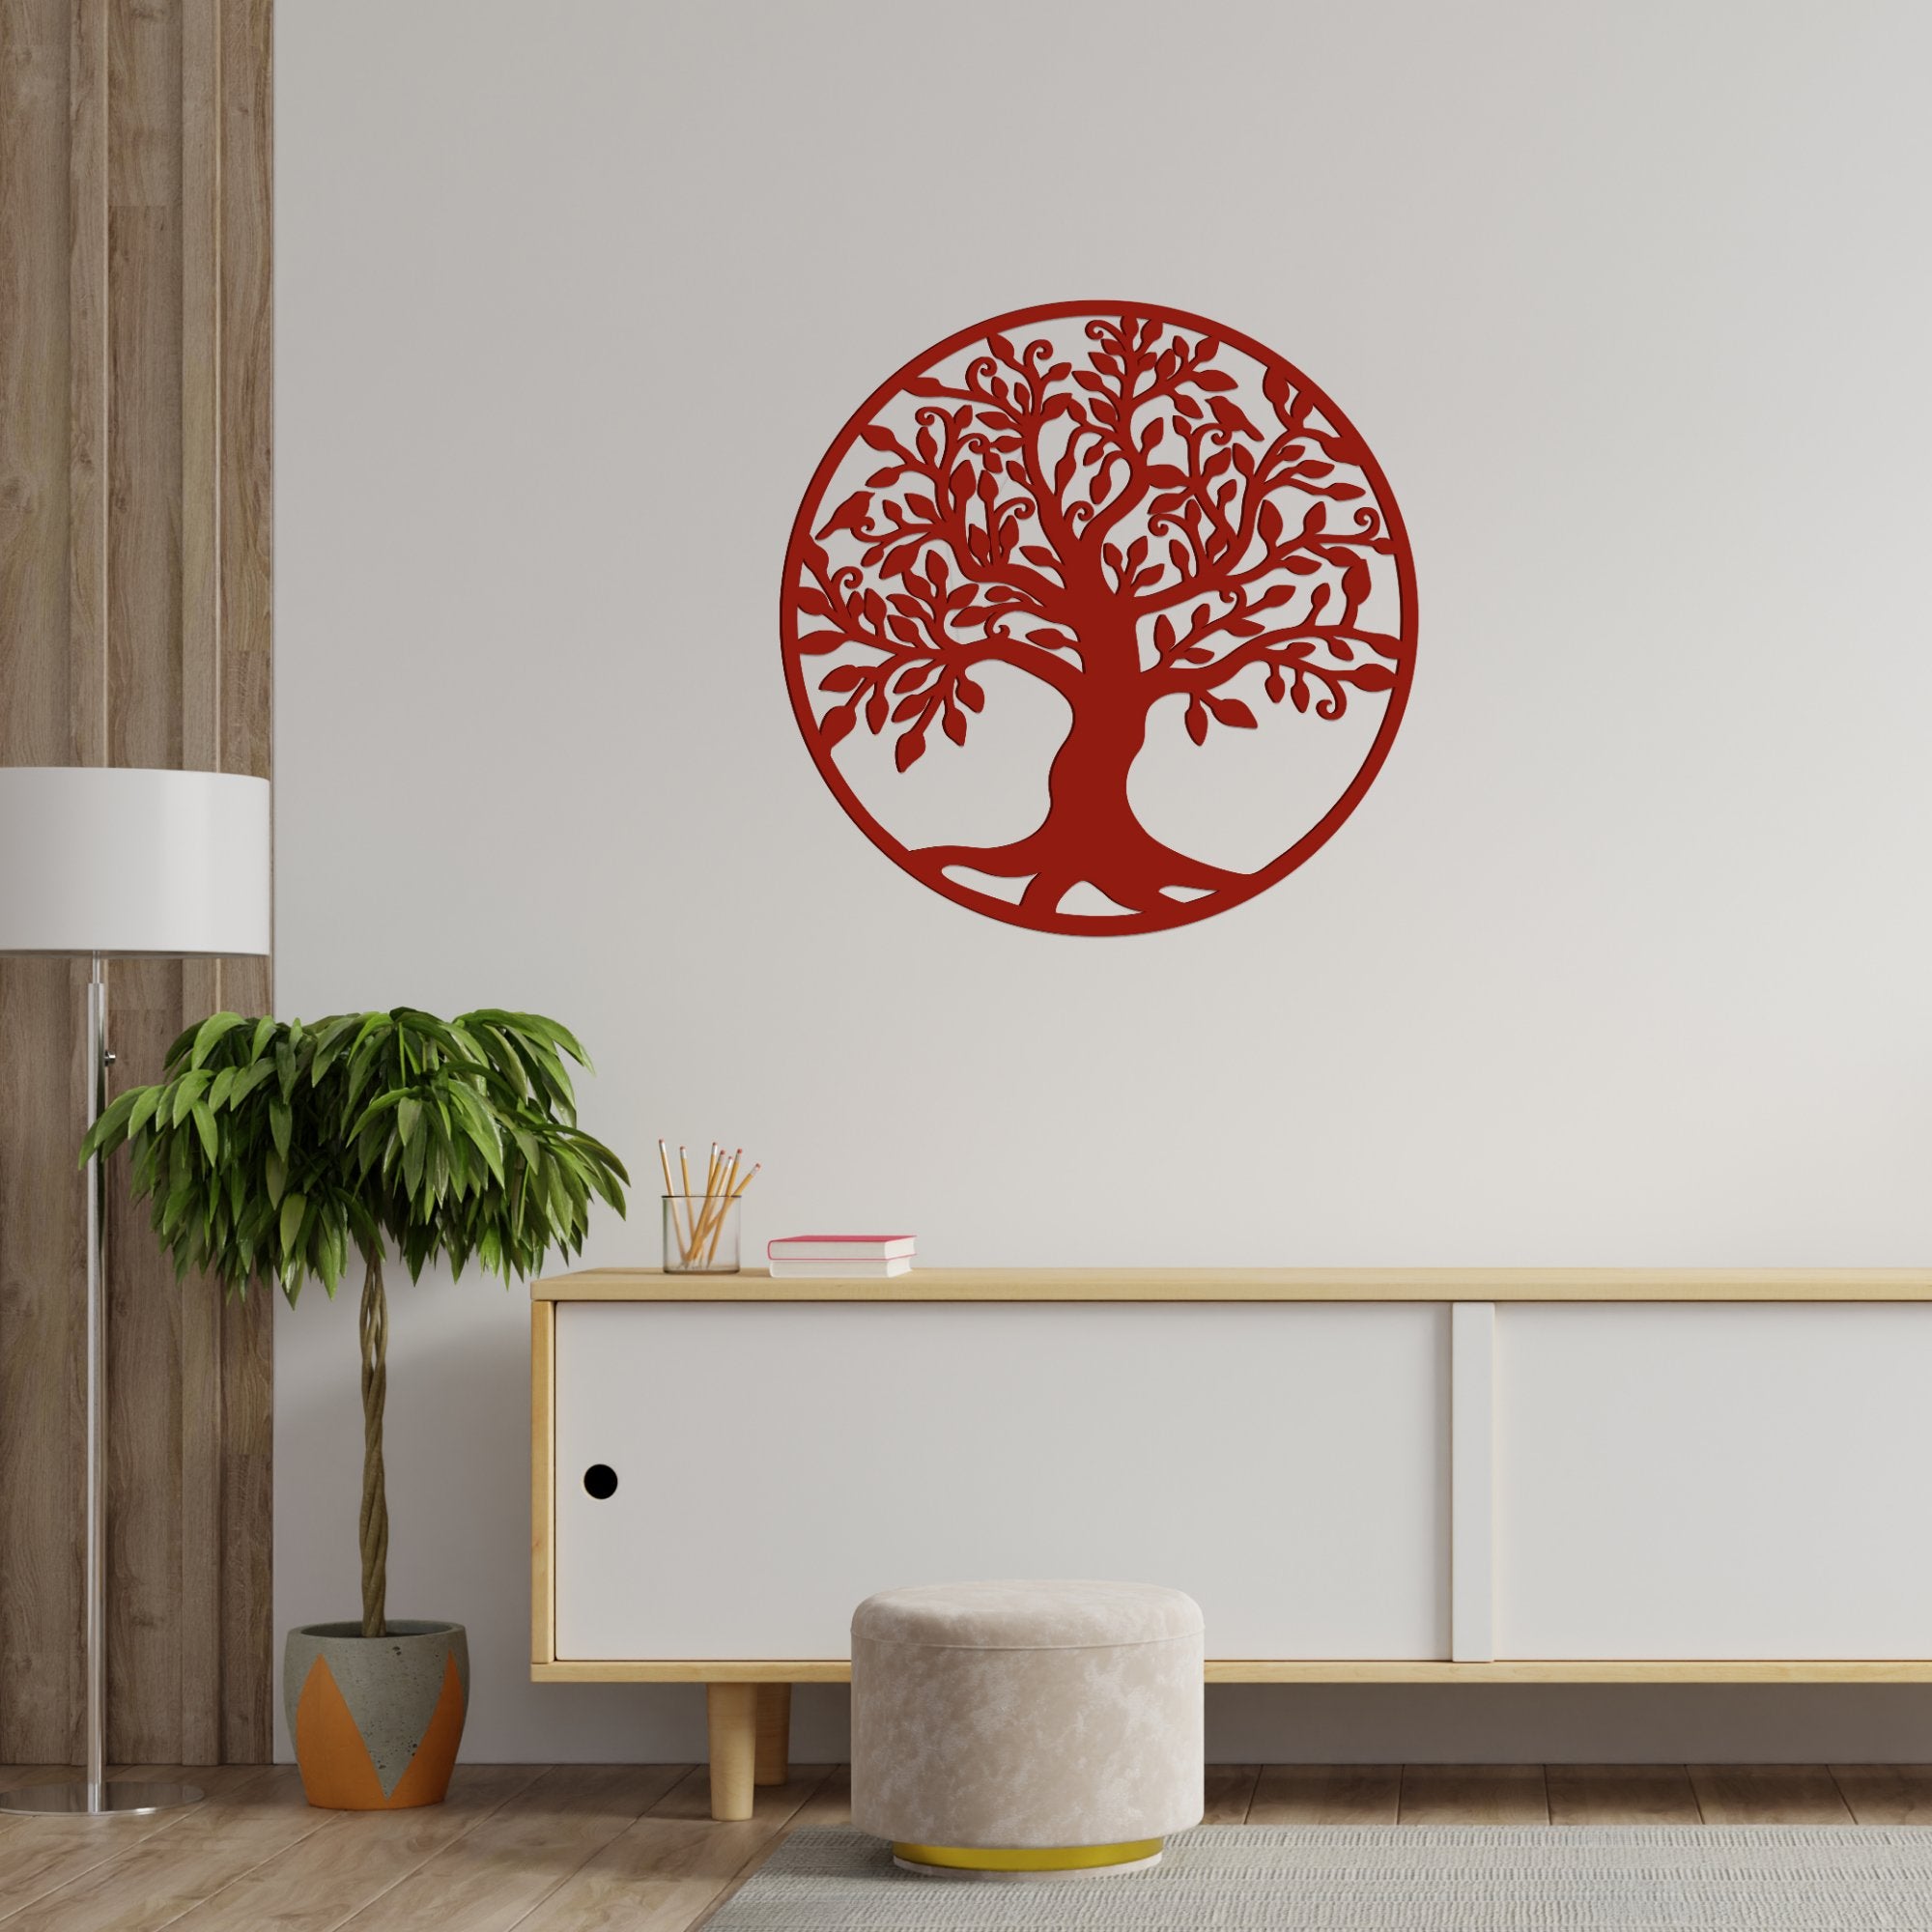 A Big Tree Design in Circle Premium Quality Wooden Wall Hanging